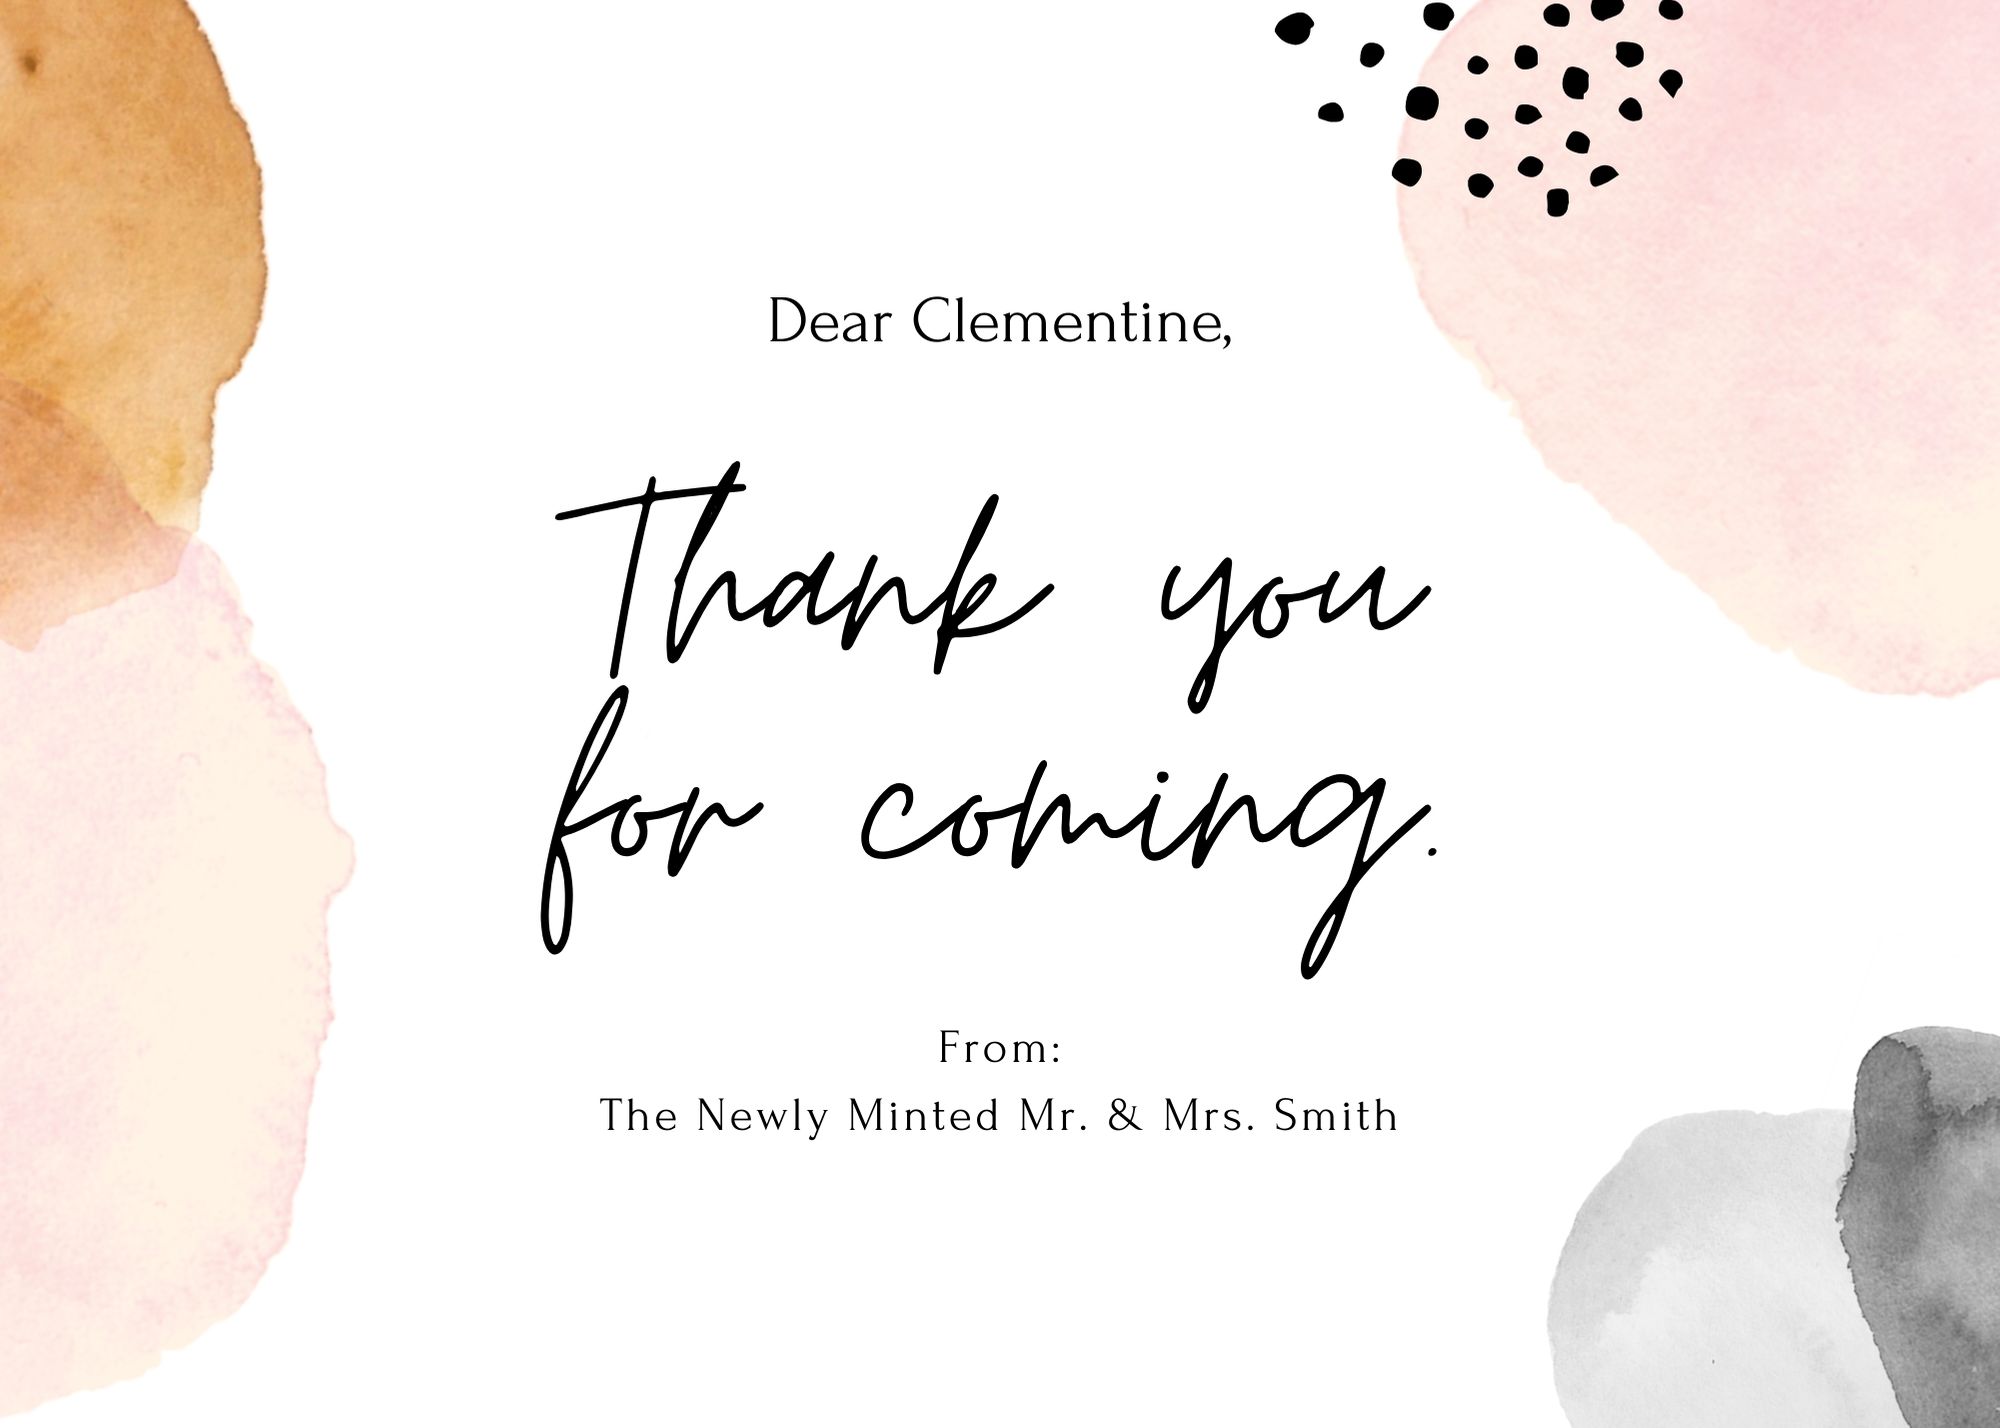 Canva is a great tool for bloggers. As a 'mother of the bride' myself, I recently discovered canva has an amazing library of wedding templates including Wedding Planning Checklists, Invitations, Save The Date cards and more! I've posted a few of my favorites.